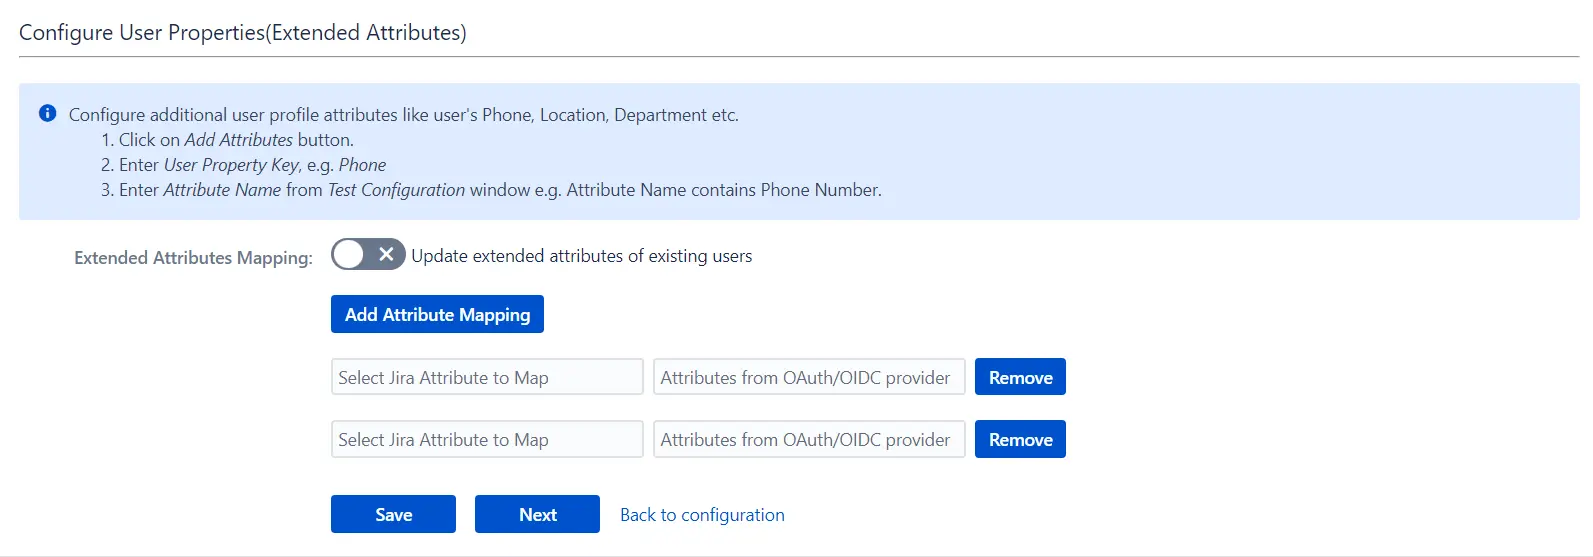 OAuth / OpenID Single Sign On (SSO) into Jira, provision for configuring additional attributes